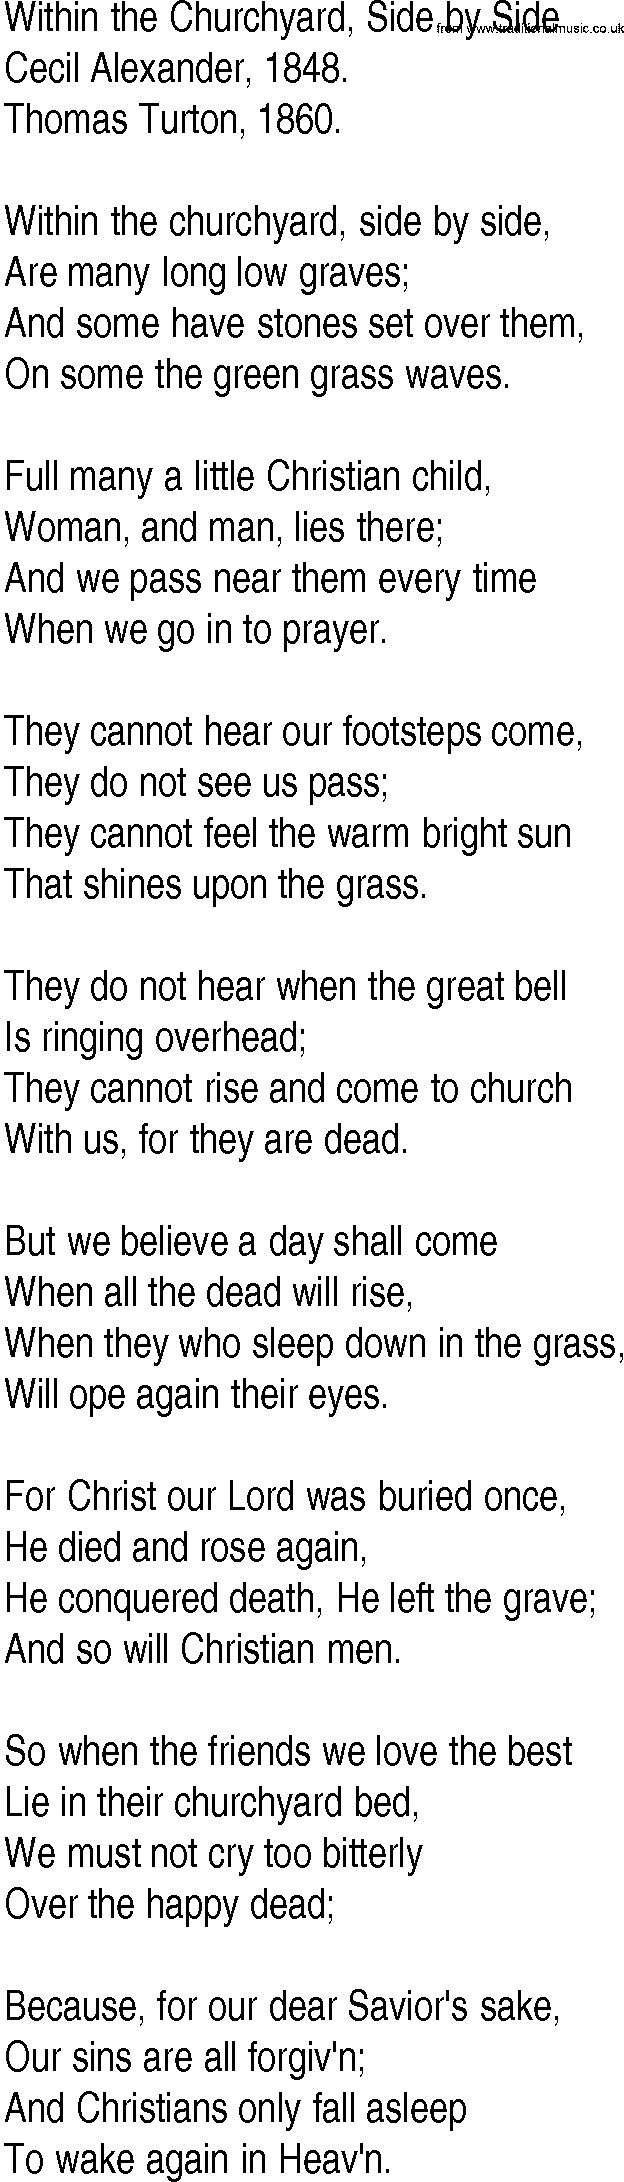 Hymn and Gospel Song: Within the Churchyard, Side by Side by Cecil Alexander lyrics